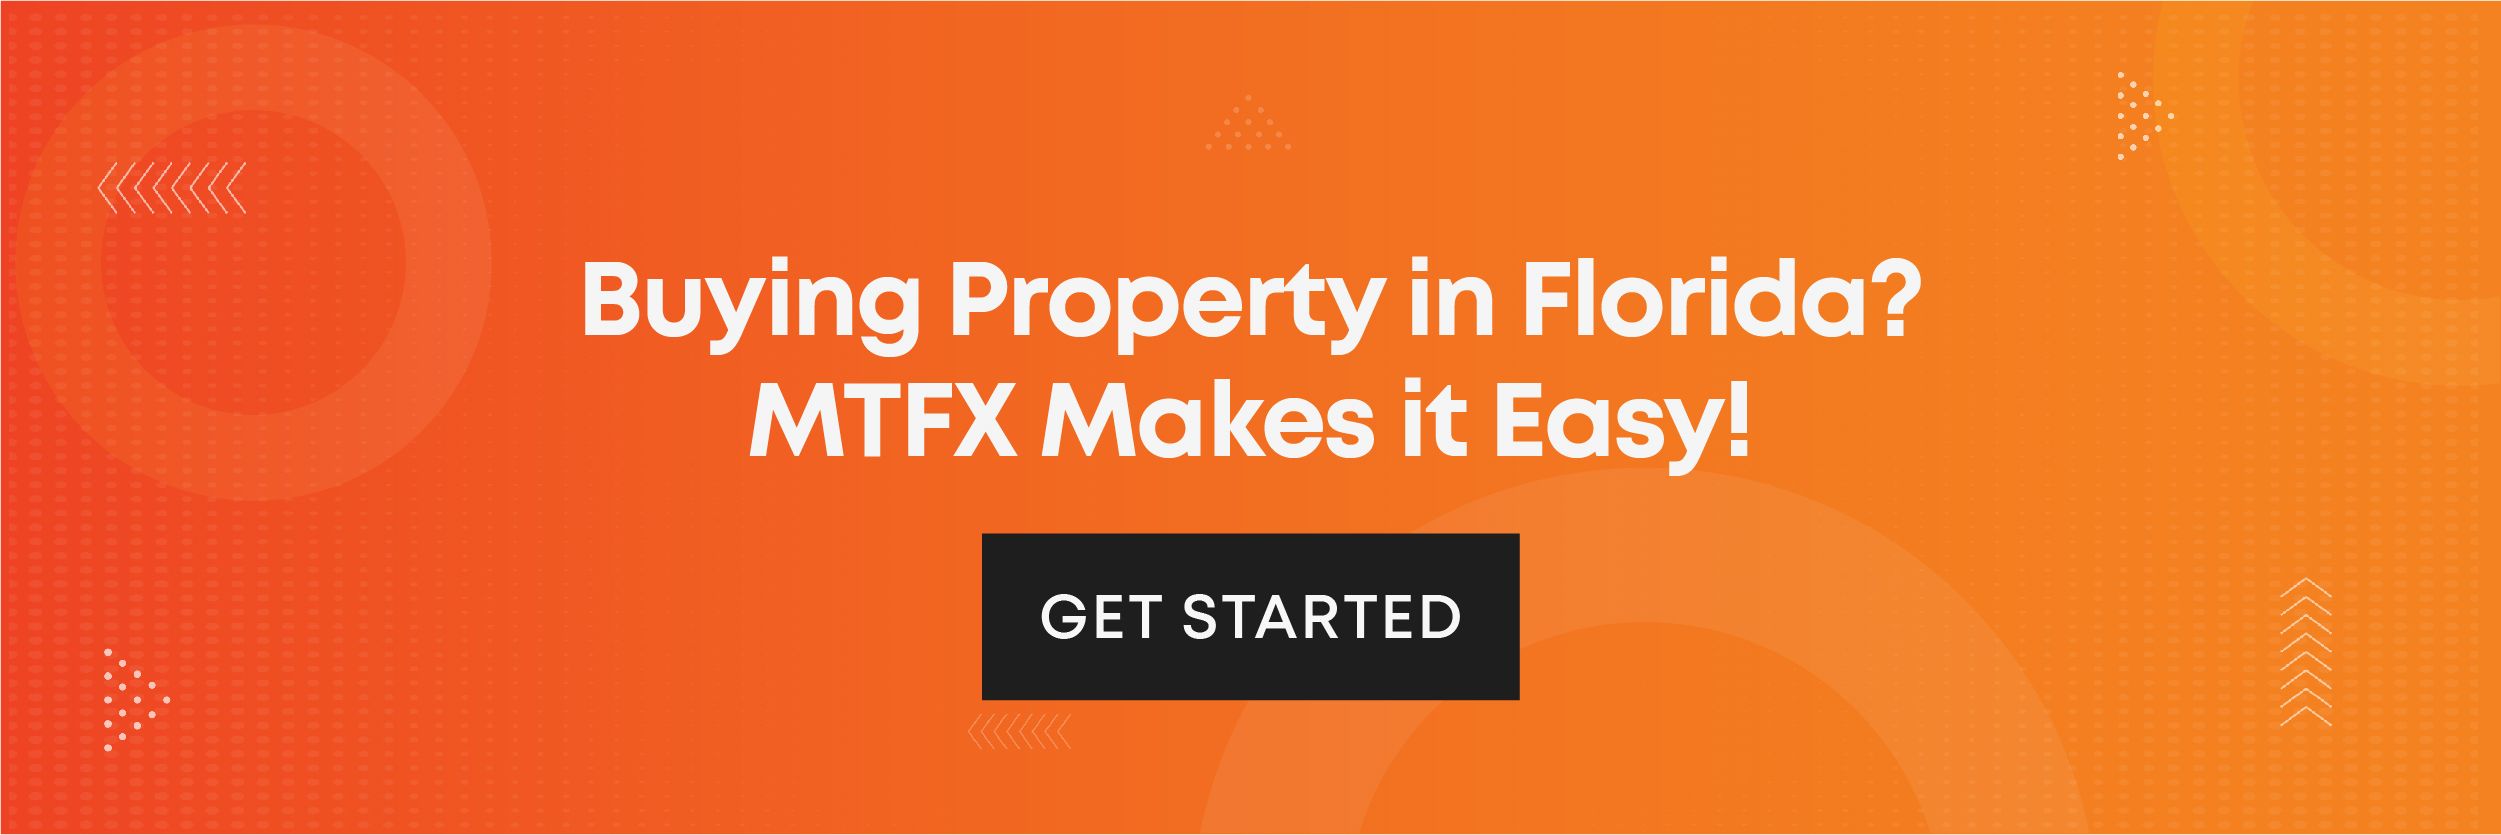 Buying property in Florida? MTFX makes it Easy!